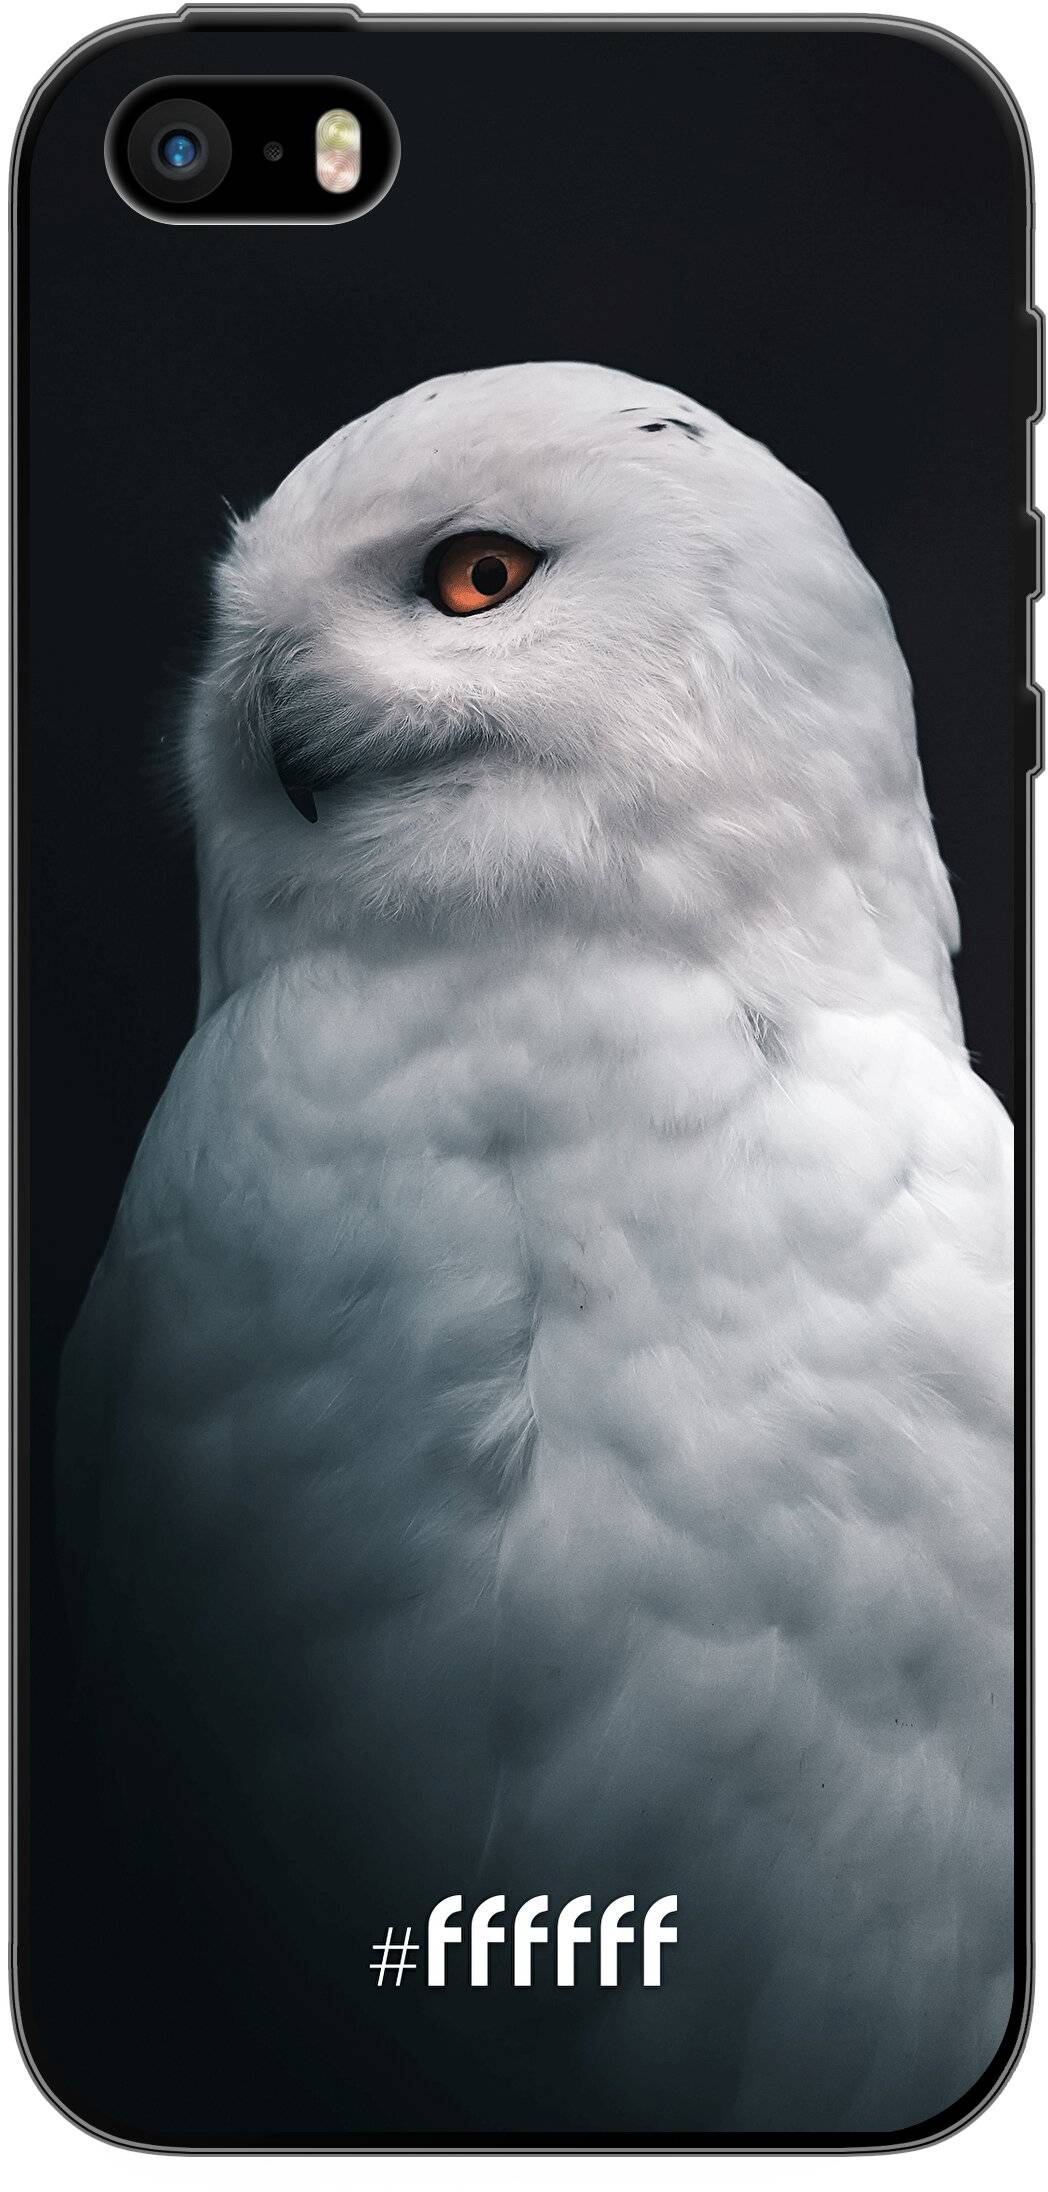 Witte Uil iPhone 5